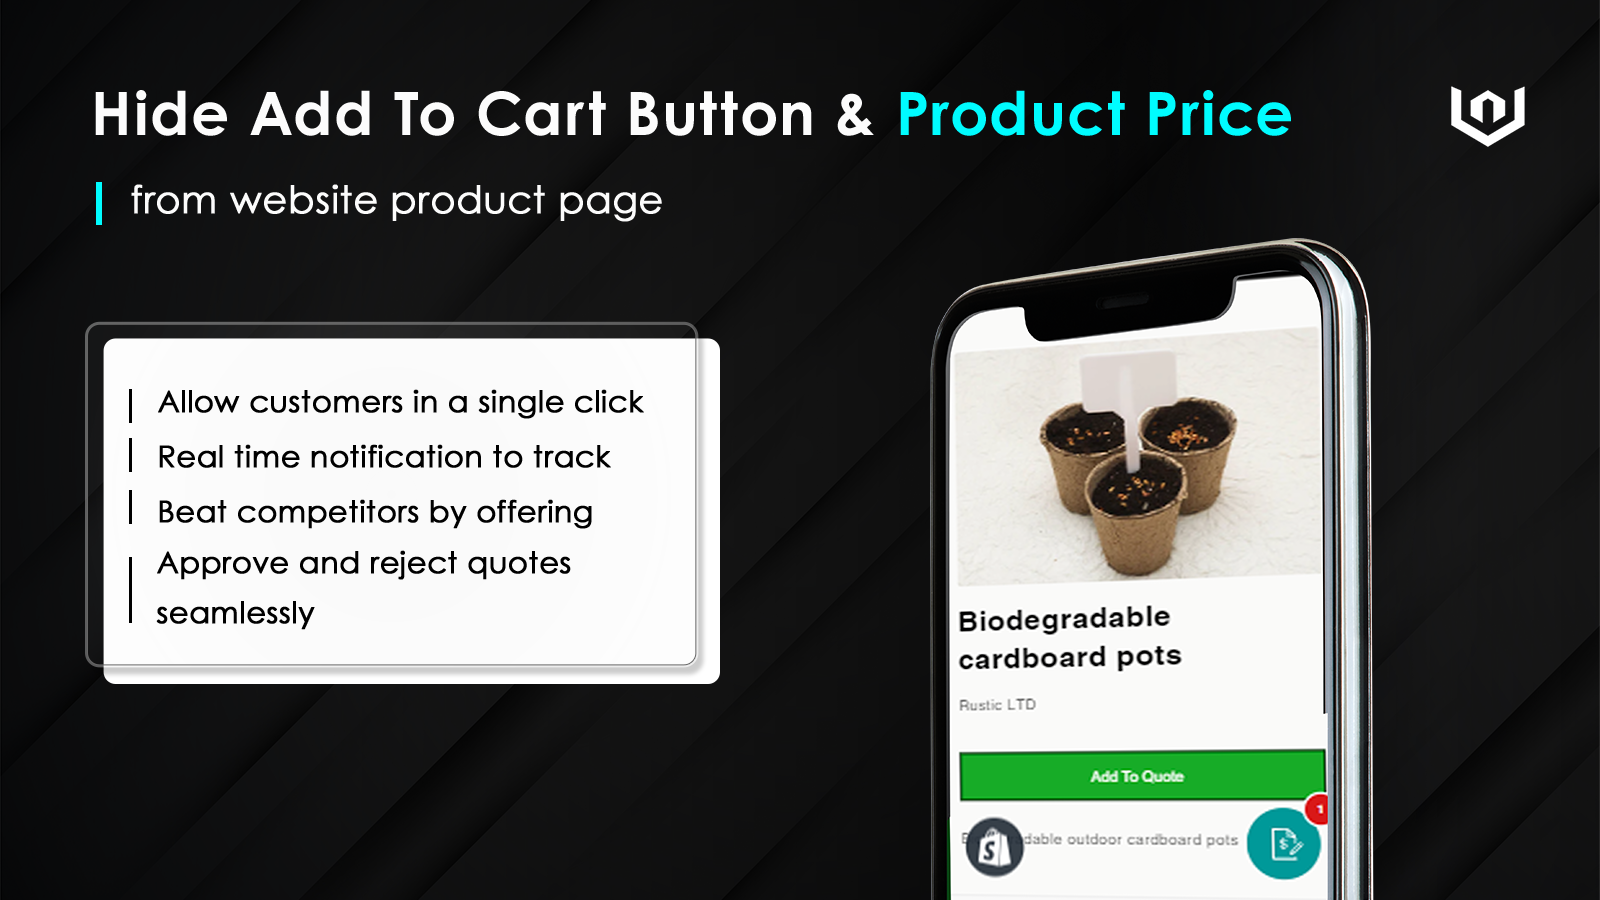 Enable customers to offer new prices for the products